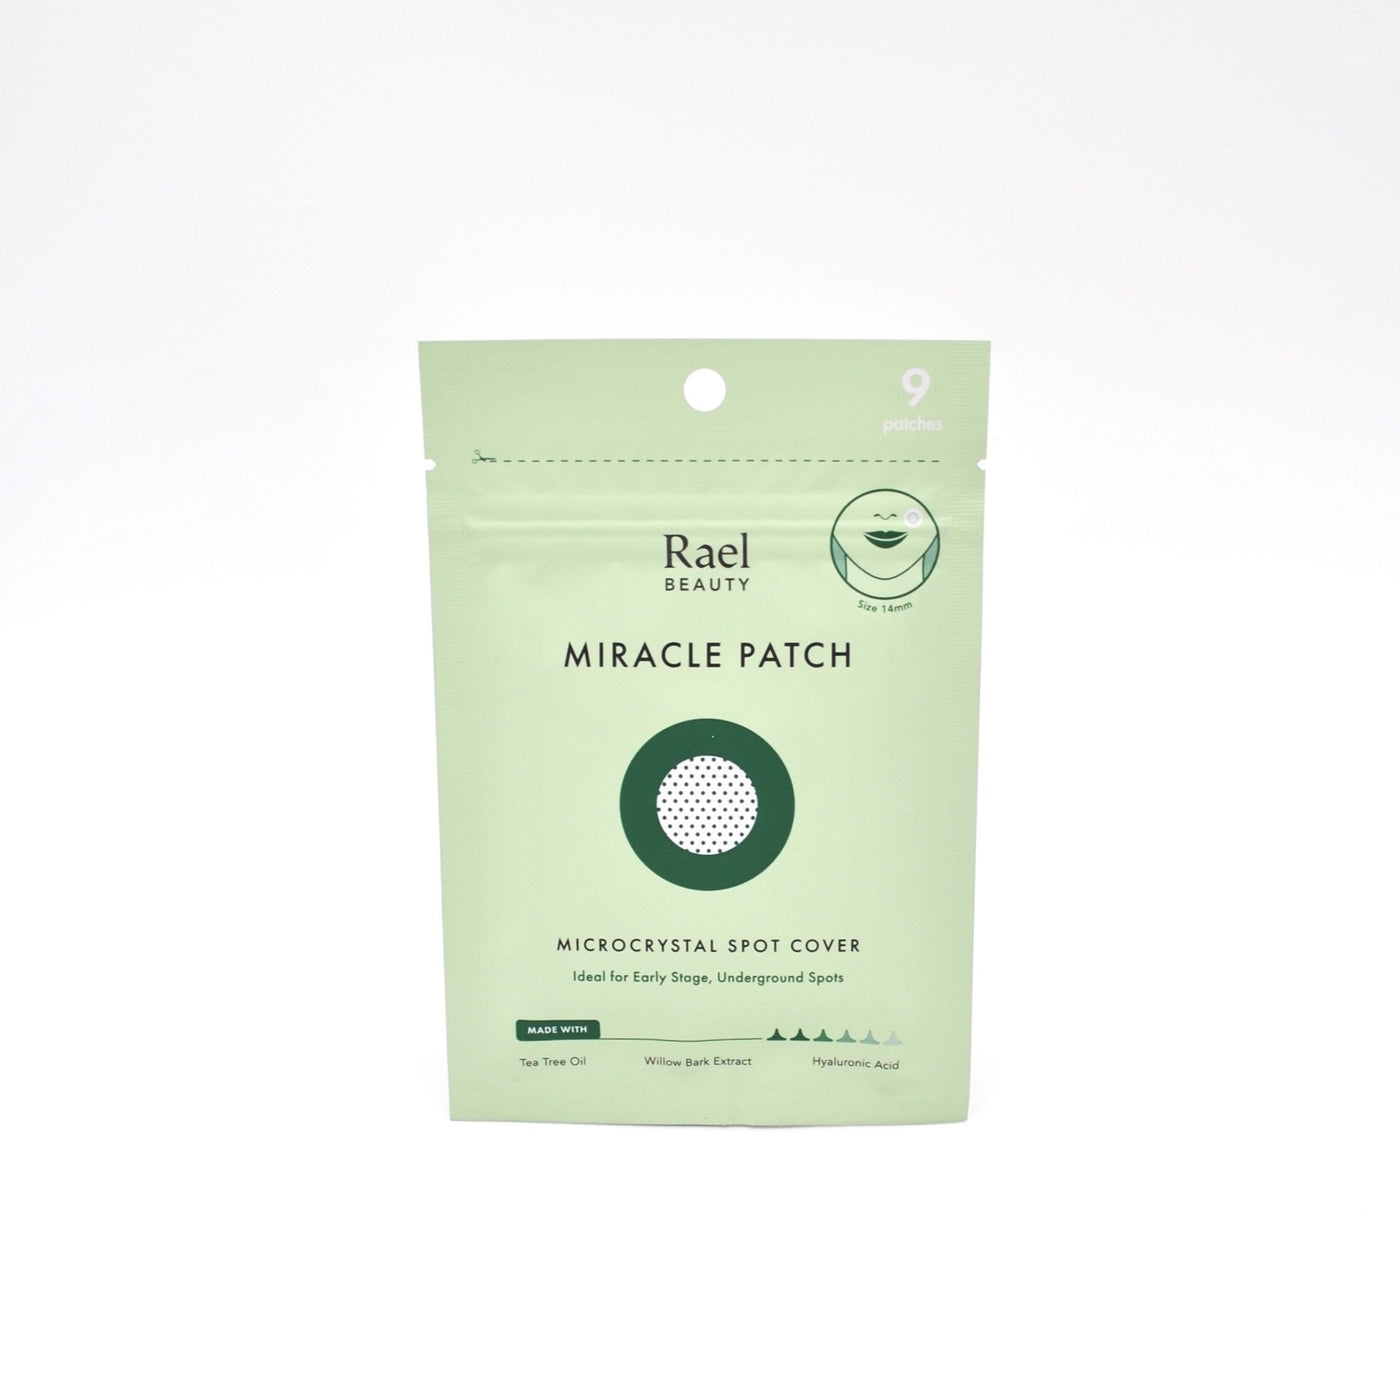 Rael Beauty - Miracle Patch Microcrystal Spot Cover